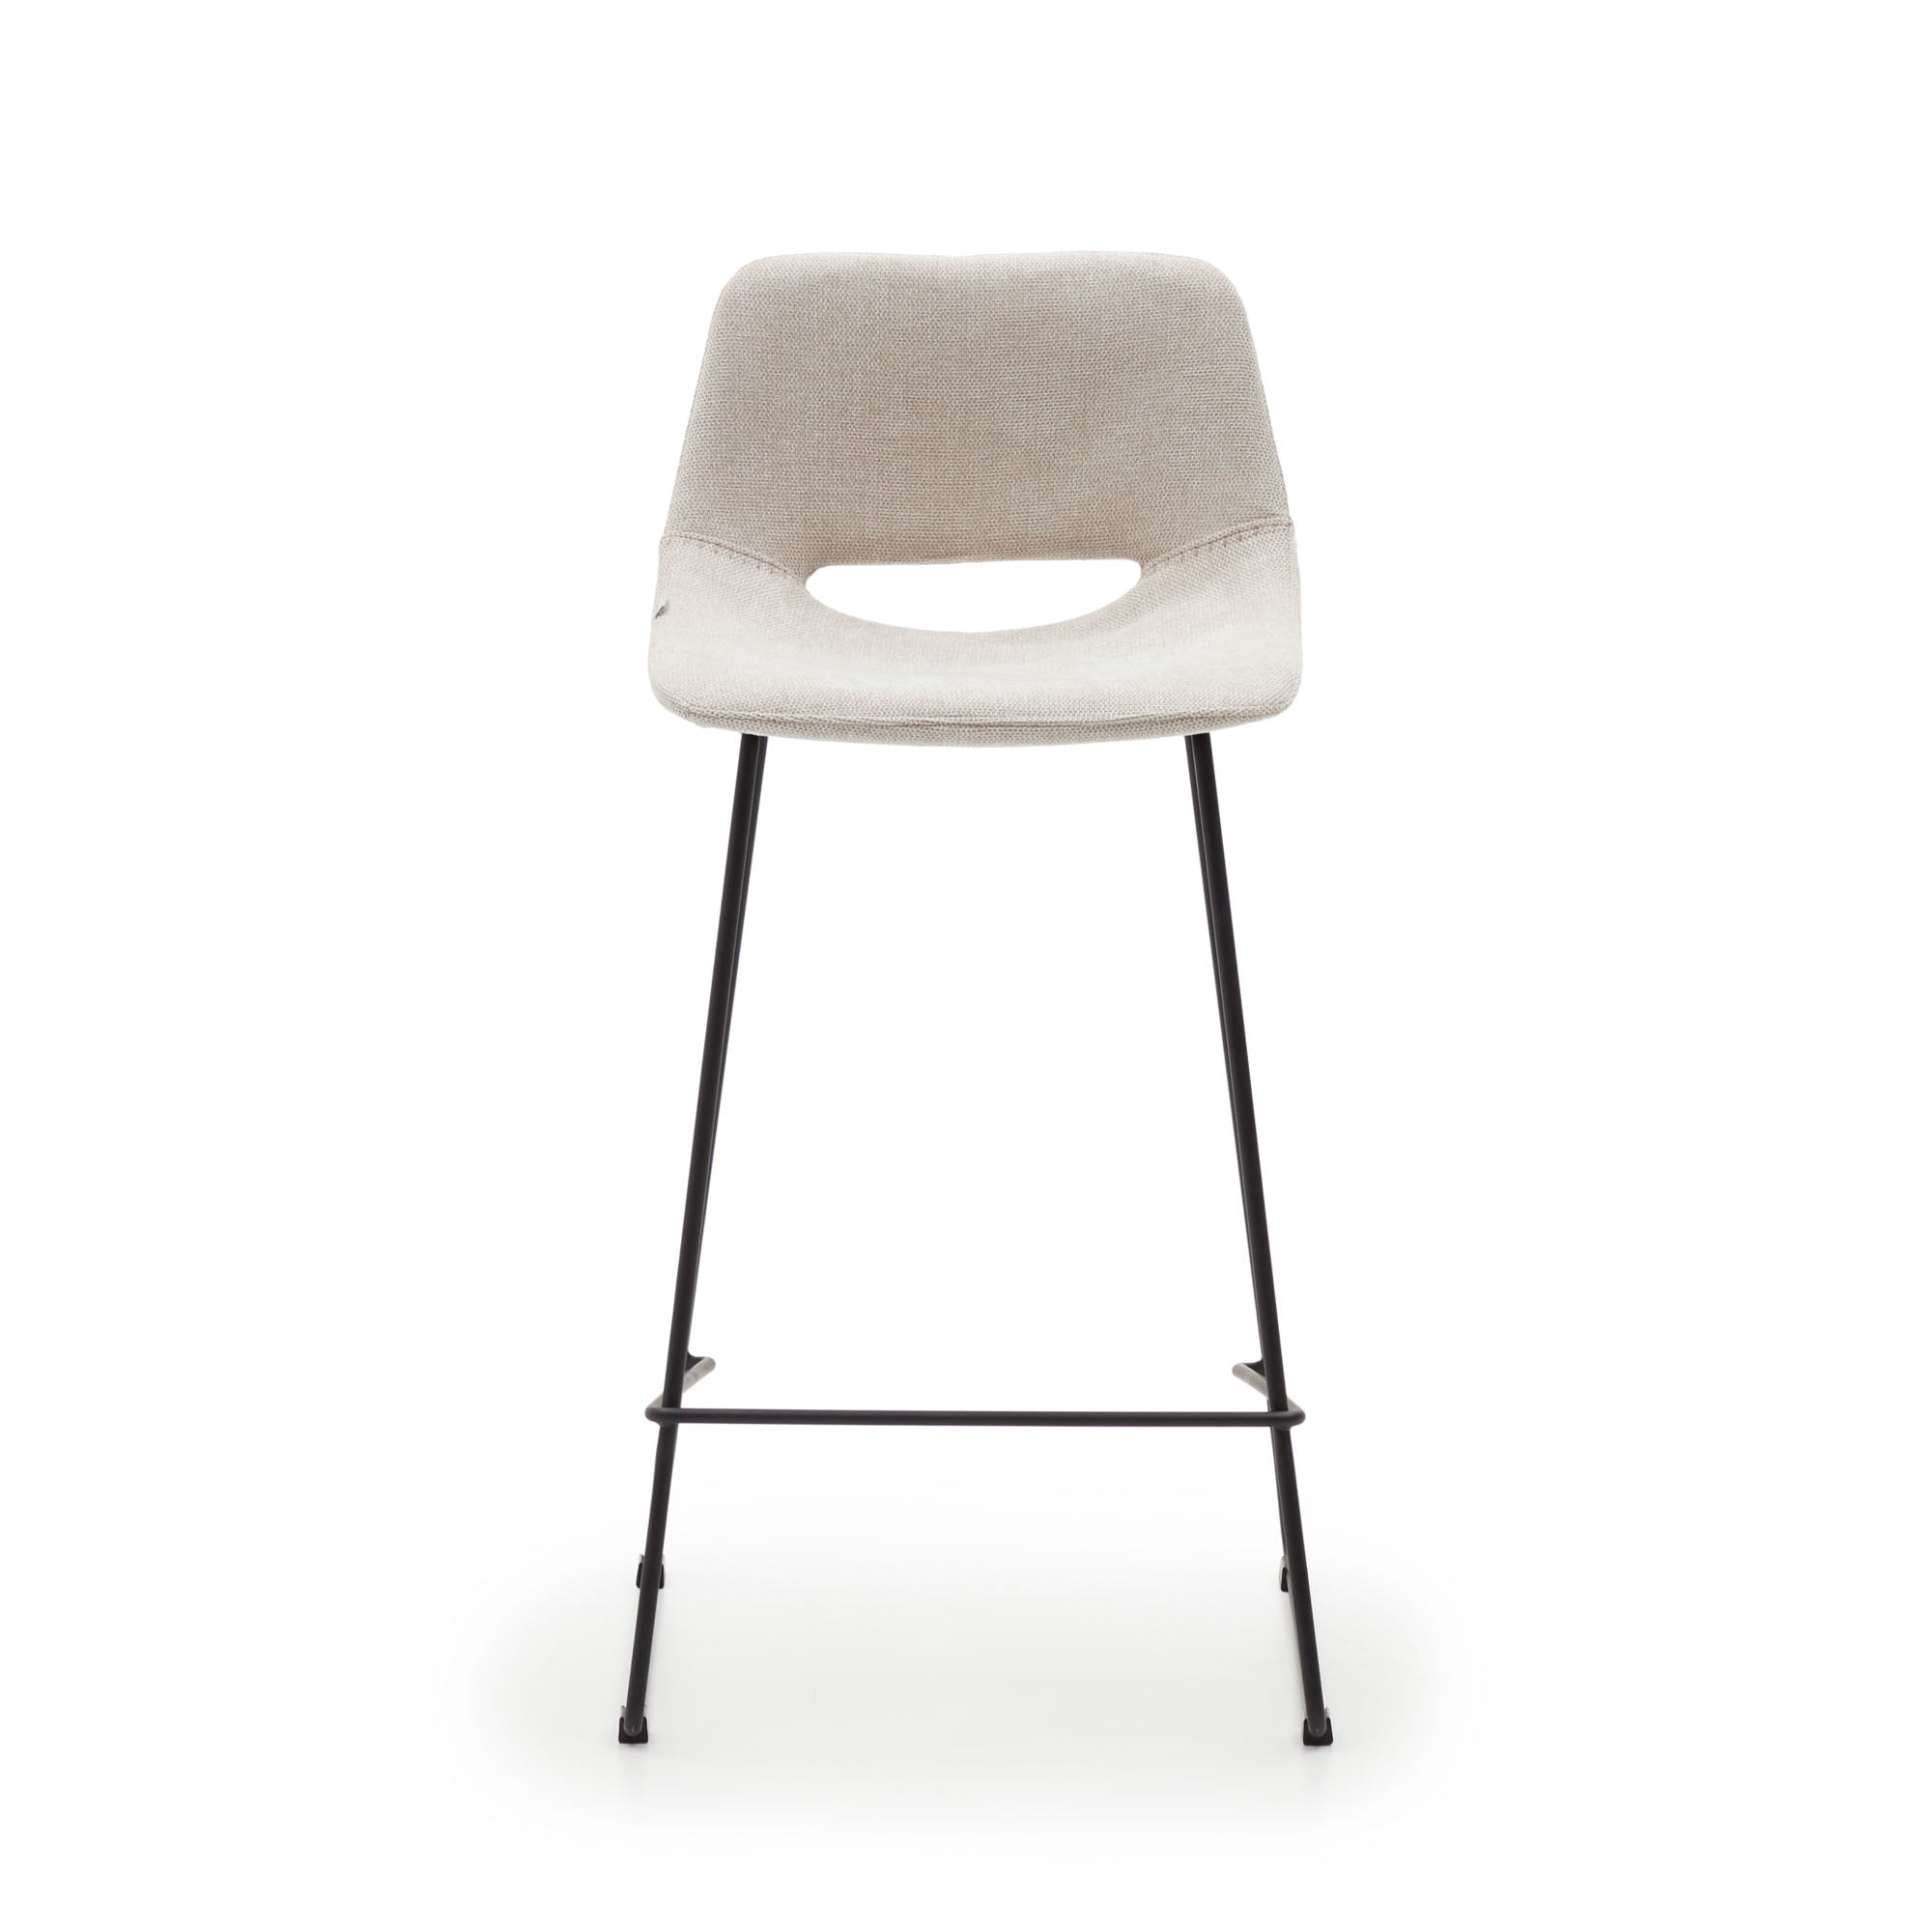 Zahara beige stool with steel in a black finish, height 65 cm